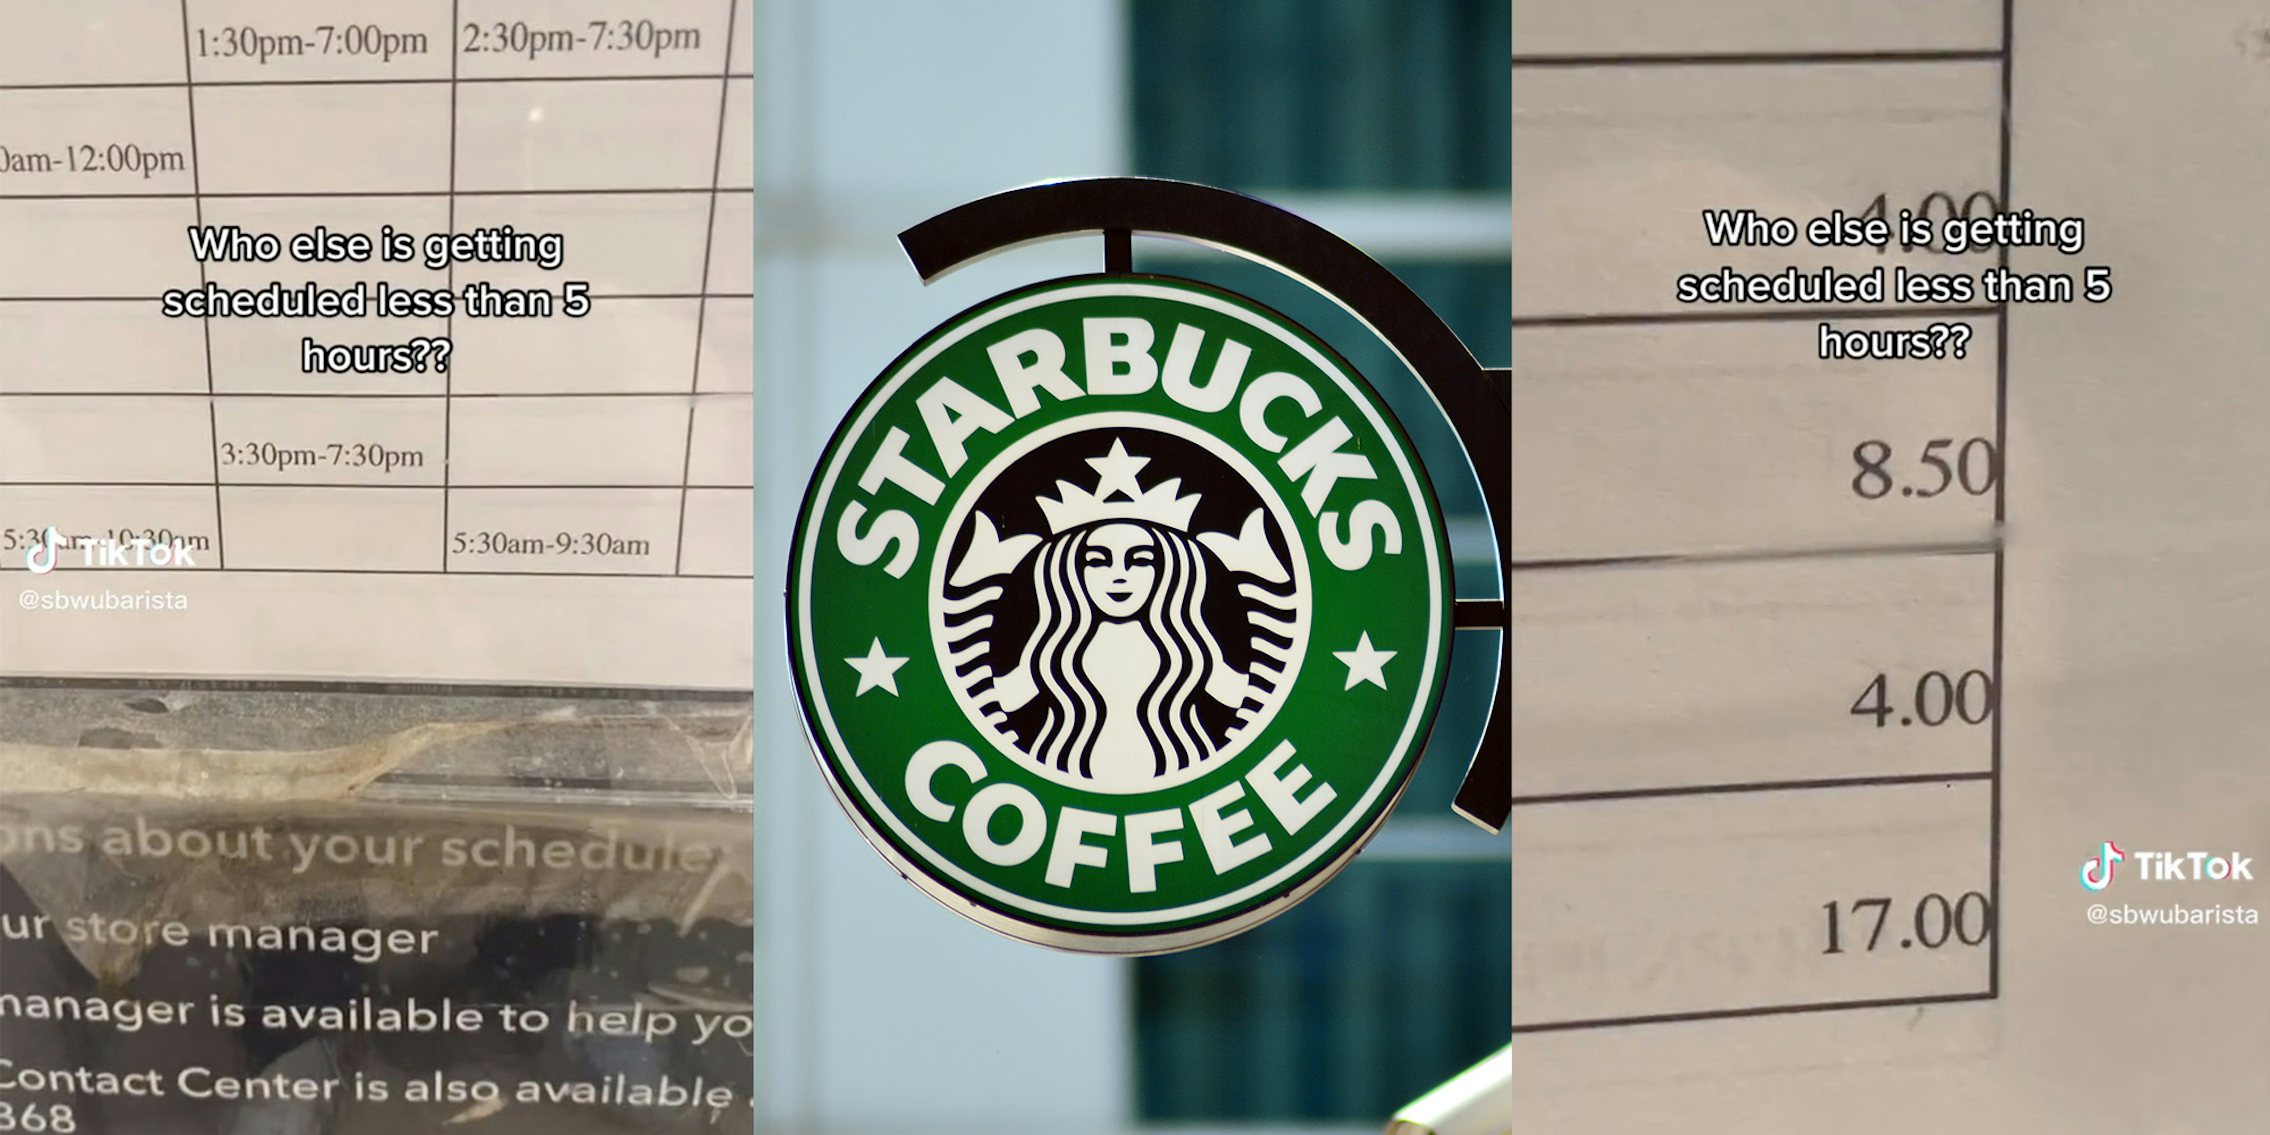 Starbucks barista says she keeps getting scheduled for less than 5 hours